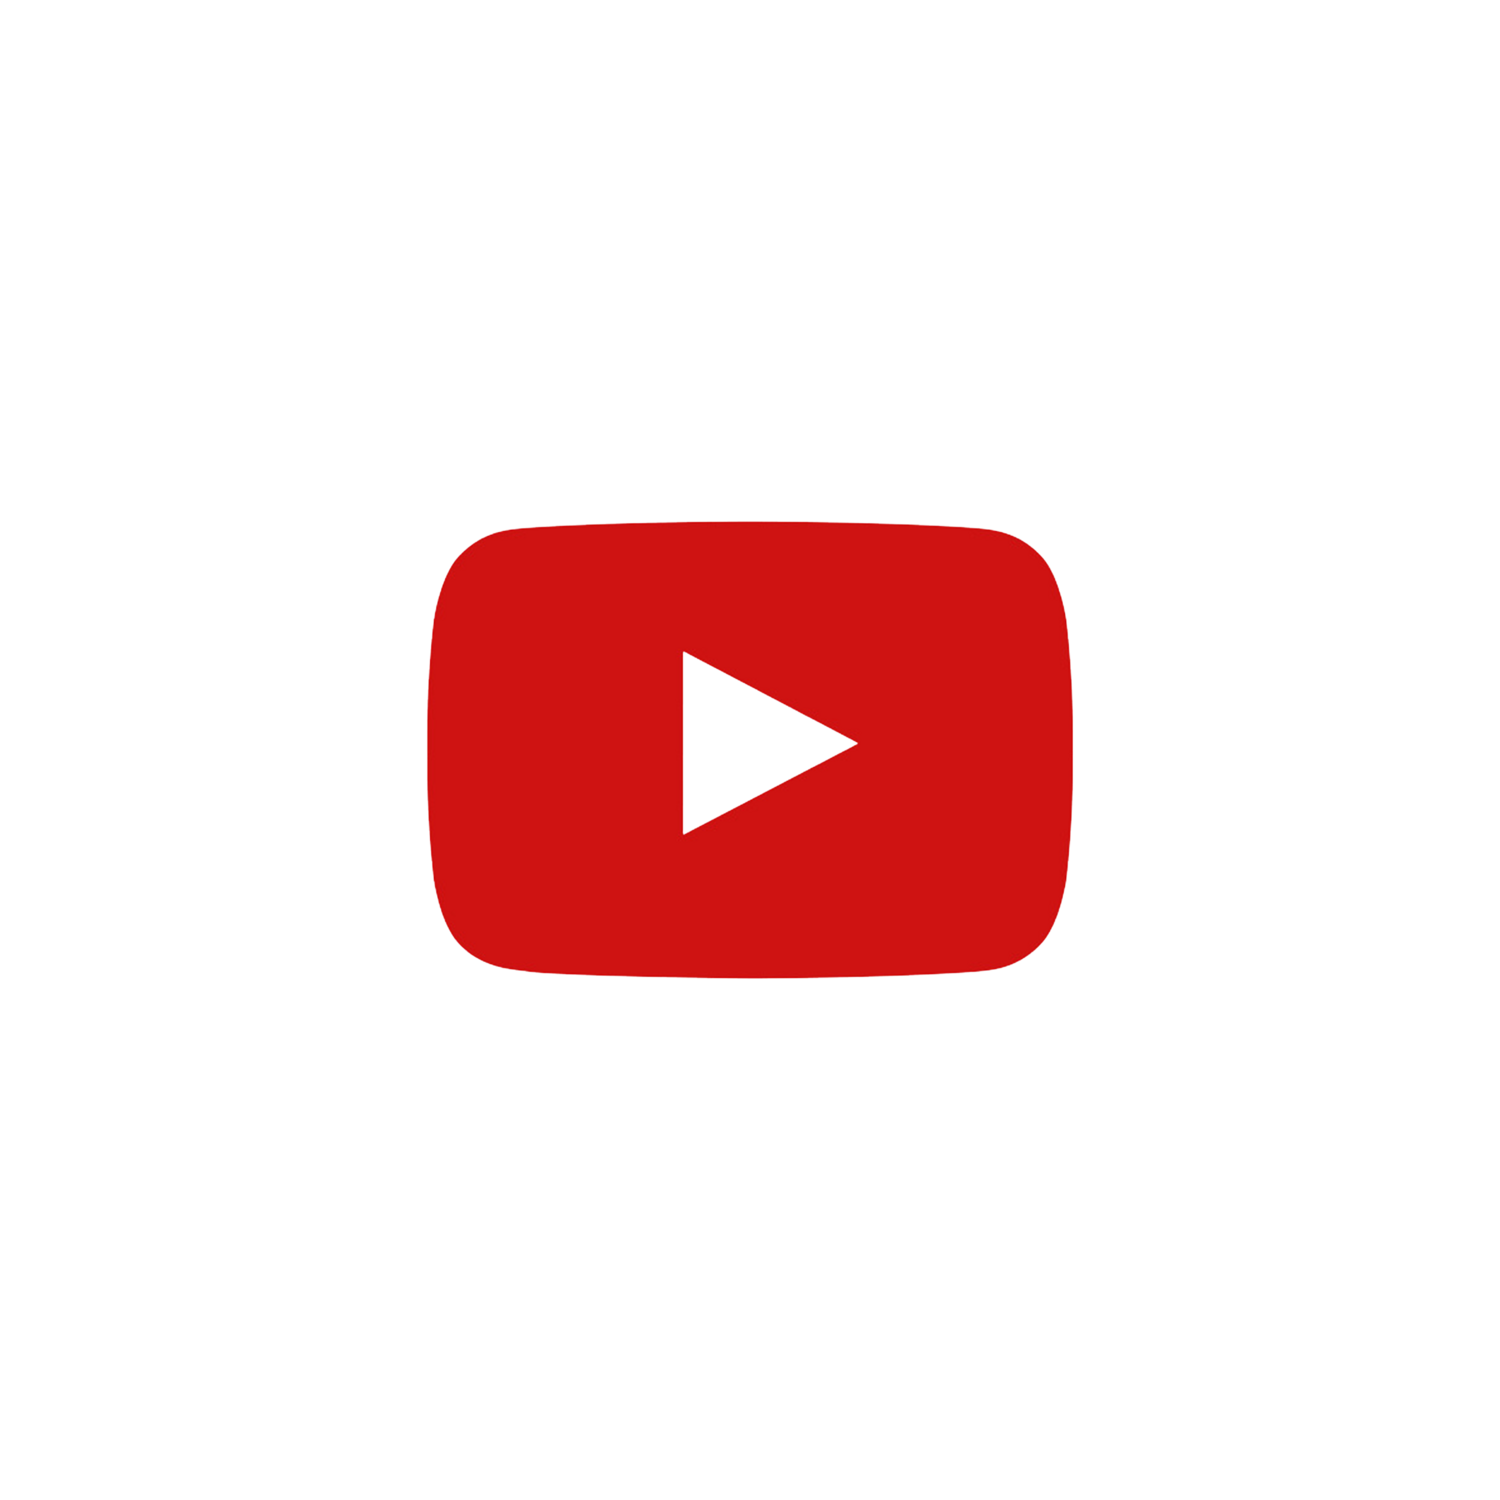 Partages Youtube